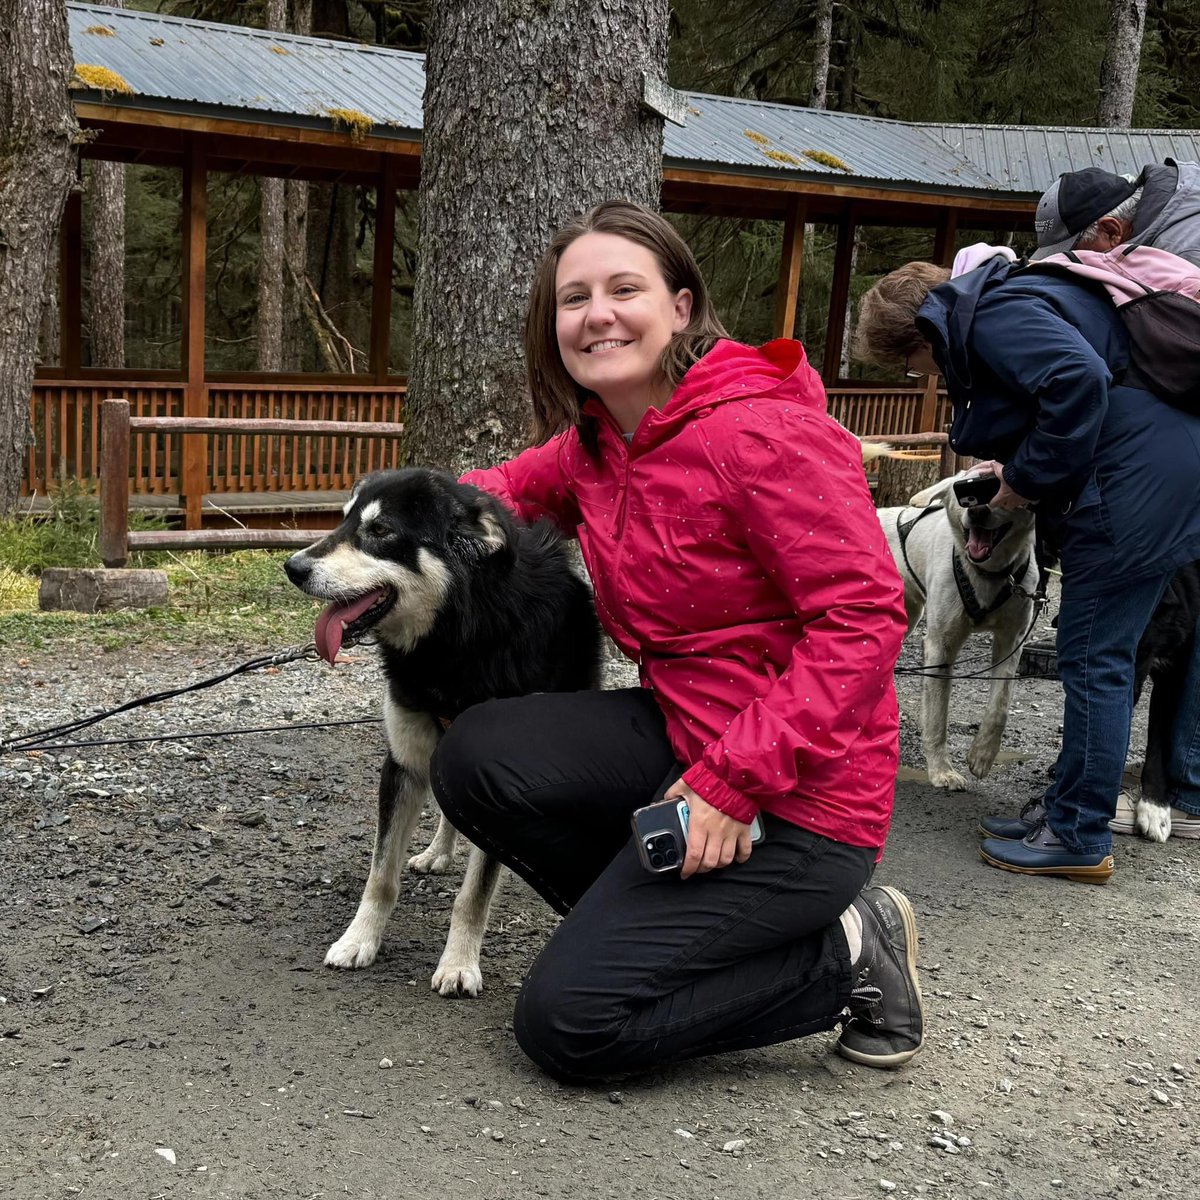 ad • Today was one of the best excursions I’ve ever taken, thanks in part to this lovely dog! I went dog sledding in Juneau, Alaska and this dog along with 12 friends pulled me (and a couple other guests) on a sled through the Alaskan forest. 🫢🤣 The dogs were SO excited to…